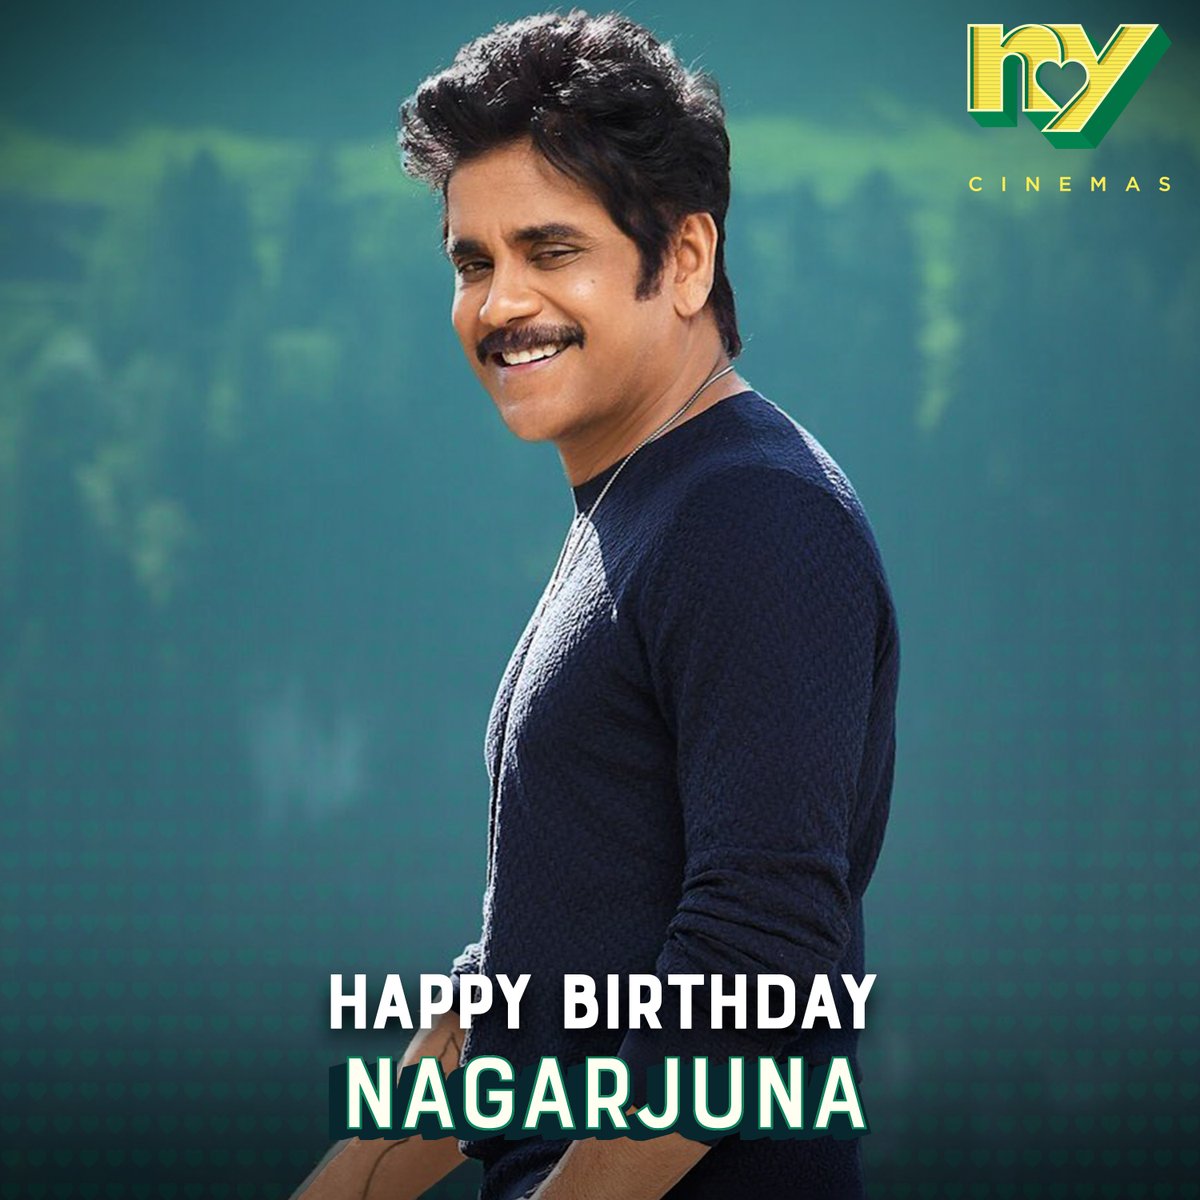 #NYCinemas wishes a very #HappyBirthday to the evergreen, the versatile and the superstar of south Indian cinema @iamnagarjuna

#HappyBirthdayNagarjuna  #HappyBirthday  #nagarjuna  #nagarjunaakkineni #akkineninagarjuna #actor  #southindianactor #superstar  #indiancinema  #movies